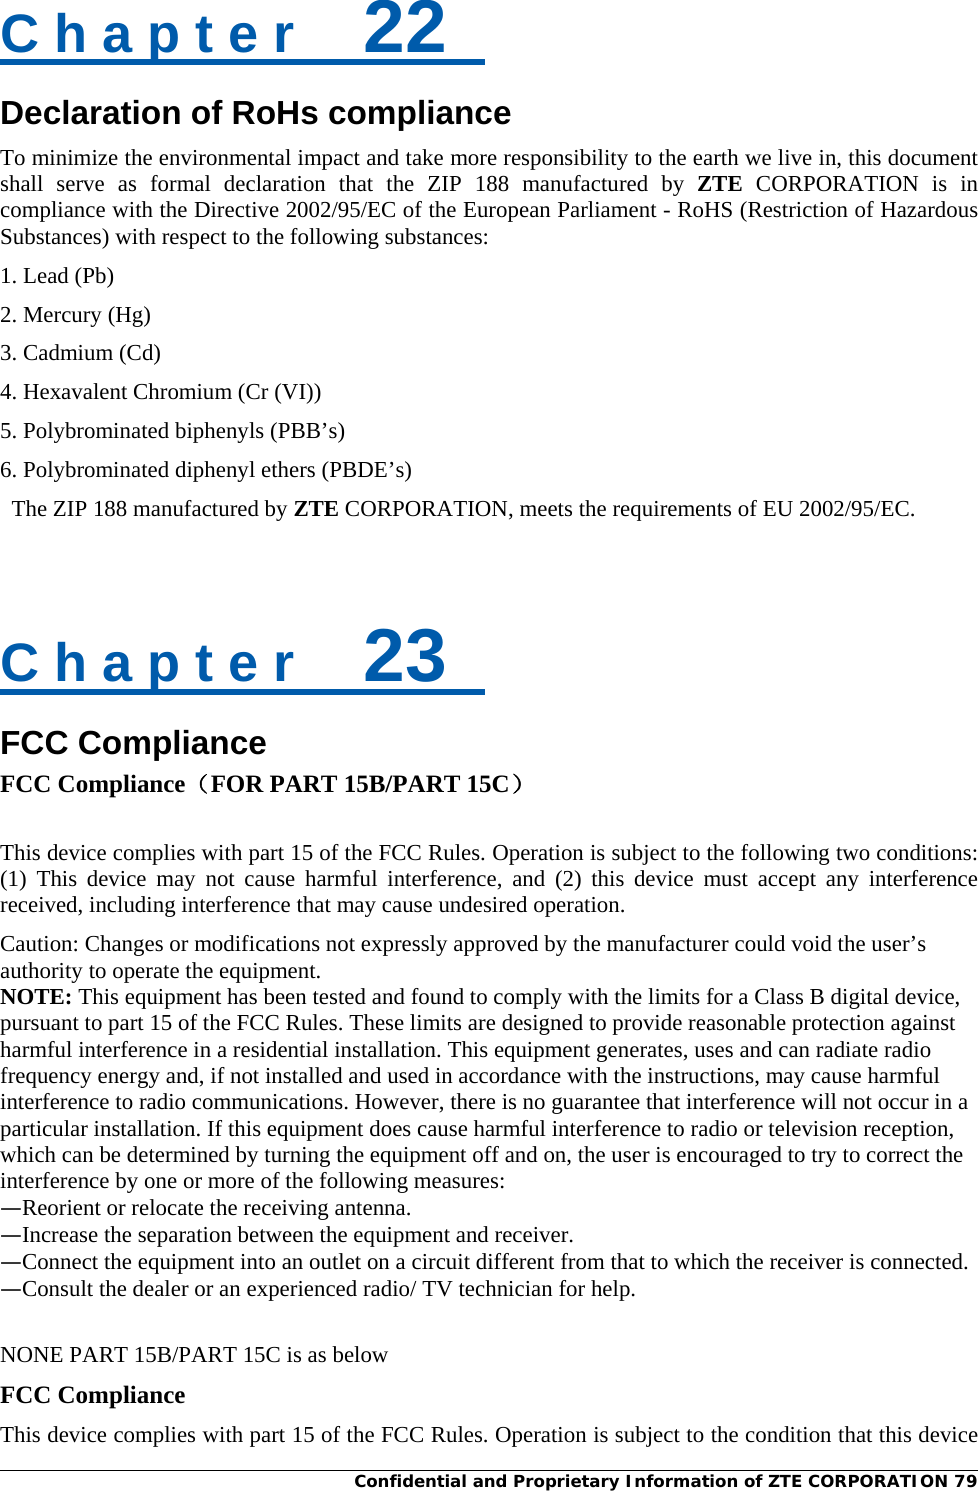  Confidential and Proprietary Information of ZTE CORPORATION 79C h a p t e r    22   Declaration of RoHs compliance To minimize the environmental impact and take more responsibility to the earth we live in, this document shall serve as formal declaration that the ZIP 188 manufactured by ZTE CORPORATION is in compliance with the Directive 2002/95/EC of the European Parliament - RoHS (Restriction of Hazardous Substances) with respect to the following substances: 1. Lead (Pb) 2. Mercury (Hg) 3. Cadmium (Cd)   4. Hexavalent Chromium (Cr (VI)) 5. Polybrominated biphenyls (PBB’s)   6. Polybrominated diphenyl ethers (PBDE’s)   The ZIP 188 manufactured by ZTE CORPORATION, meets the requirements of EU 2002/95/EC.   C h a p t e r    23   FCC Compliance FCC Compliance（FOR PART 15B/PART 15C）  This device complies with part 15 of the FCC Rules. Operation is subject to the following two conditions: (1) This device may not cause harmful interference, and (2) this device must accept any interference received, including interference that may cause undesired operation. Caution: Changes or modifications not expressly approved by the manufacturer could void the user’s authority to operate the equipment. NOTE: This equipment has been tested and found to comply with the limits for a Class B digital device, pursuant to part 15 of the FCC Rules. These limits are designed to provide reasonable protection against harmful interference in a residential installation. This equipment generates, uses and can radiate radio frequency energy and, if not installed and used in accordance with the instructions, may cause harmful interference to radio communications. However, there is no guarantee that interference will not occur in a particular installation. If this equipment does cause harmful interference to radio or television reception, which can be determined by turning the equipment off and on, the user is encouraged to try to correct the interference by one or more of the following measures: —Reorient or relocate the receiving antenna. —Increase the separation between the equipment and receiver. —Connect the equipment into an outlet on a circuit different from that to which the receiver is connected. —Consult the dealer or an experienced radio/ TV technician for help.  NONE PART 15B/PART 15C is as below FCC Compliance This device complies with part 15 of the FCC Rules. Operation is subject to the condition that this device 